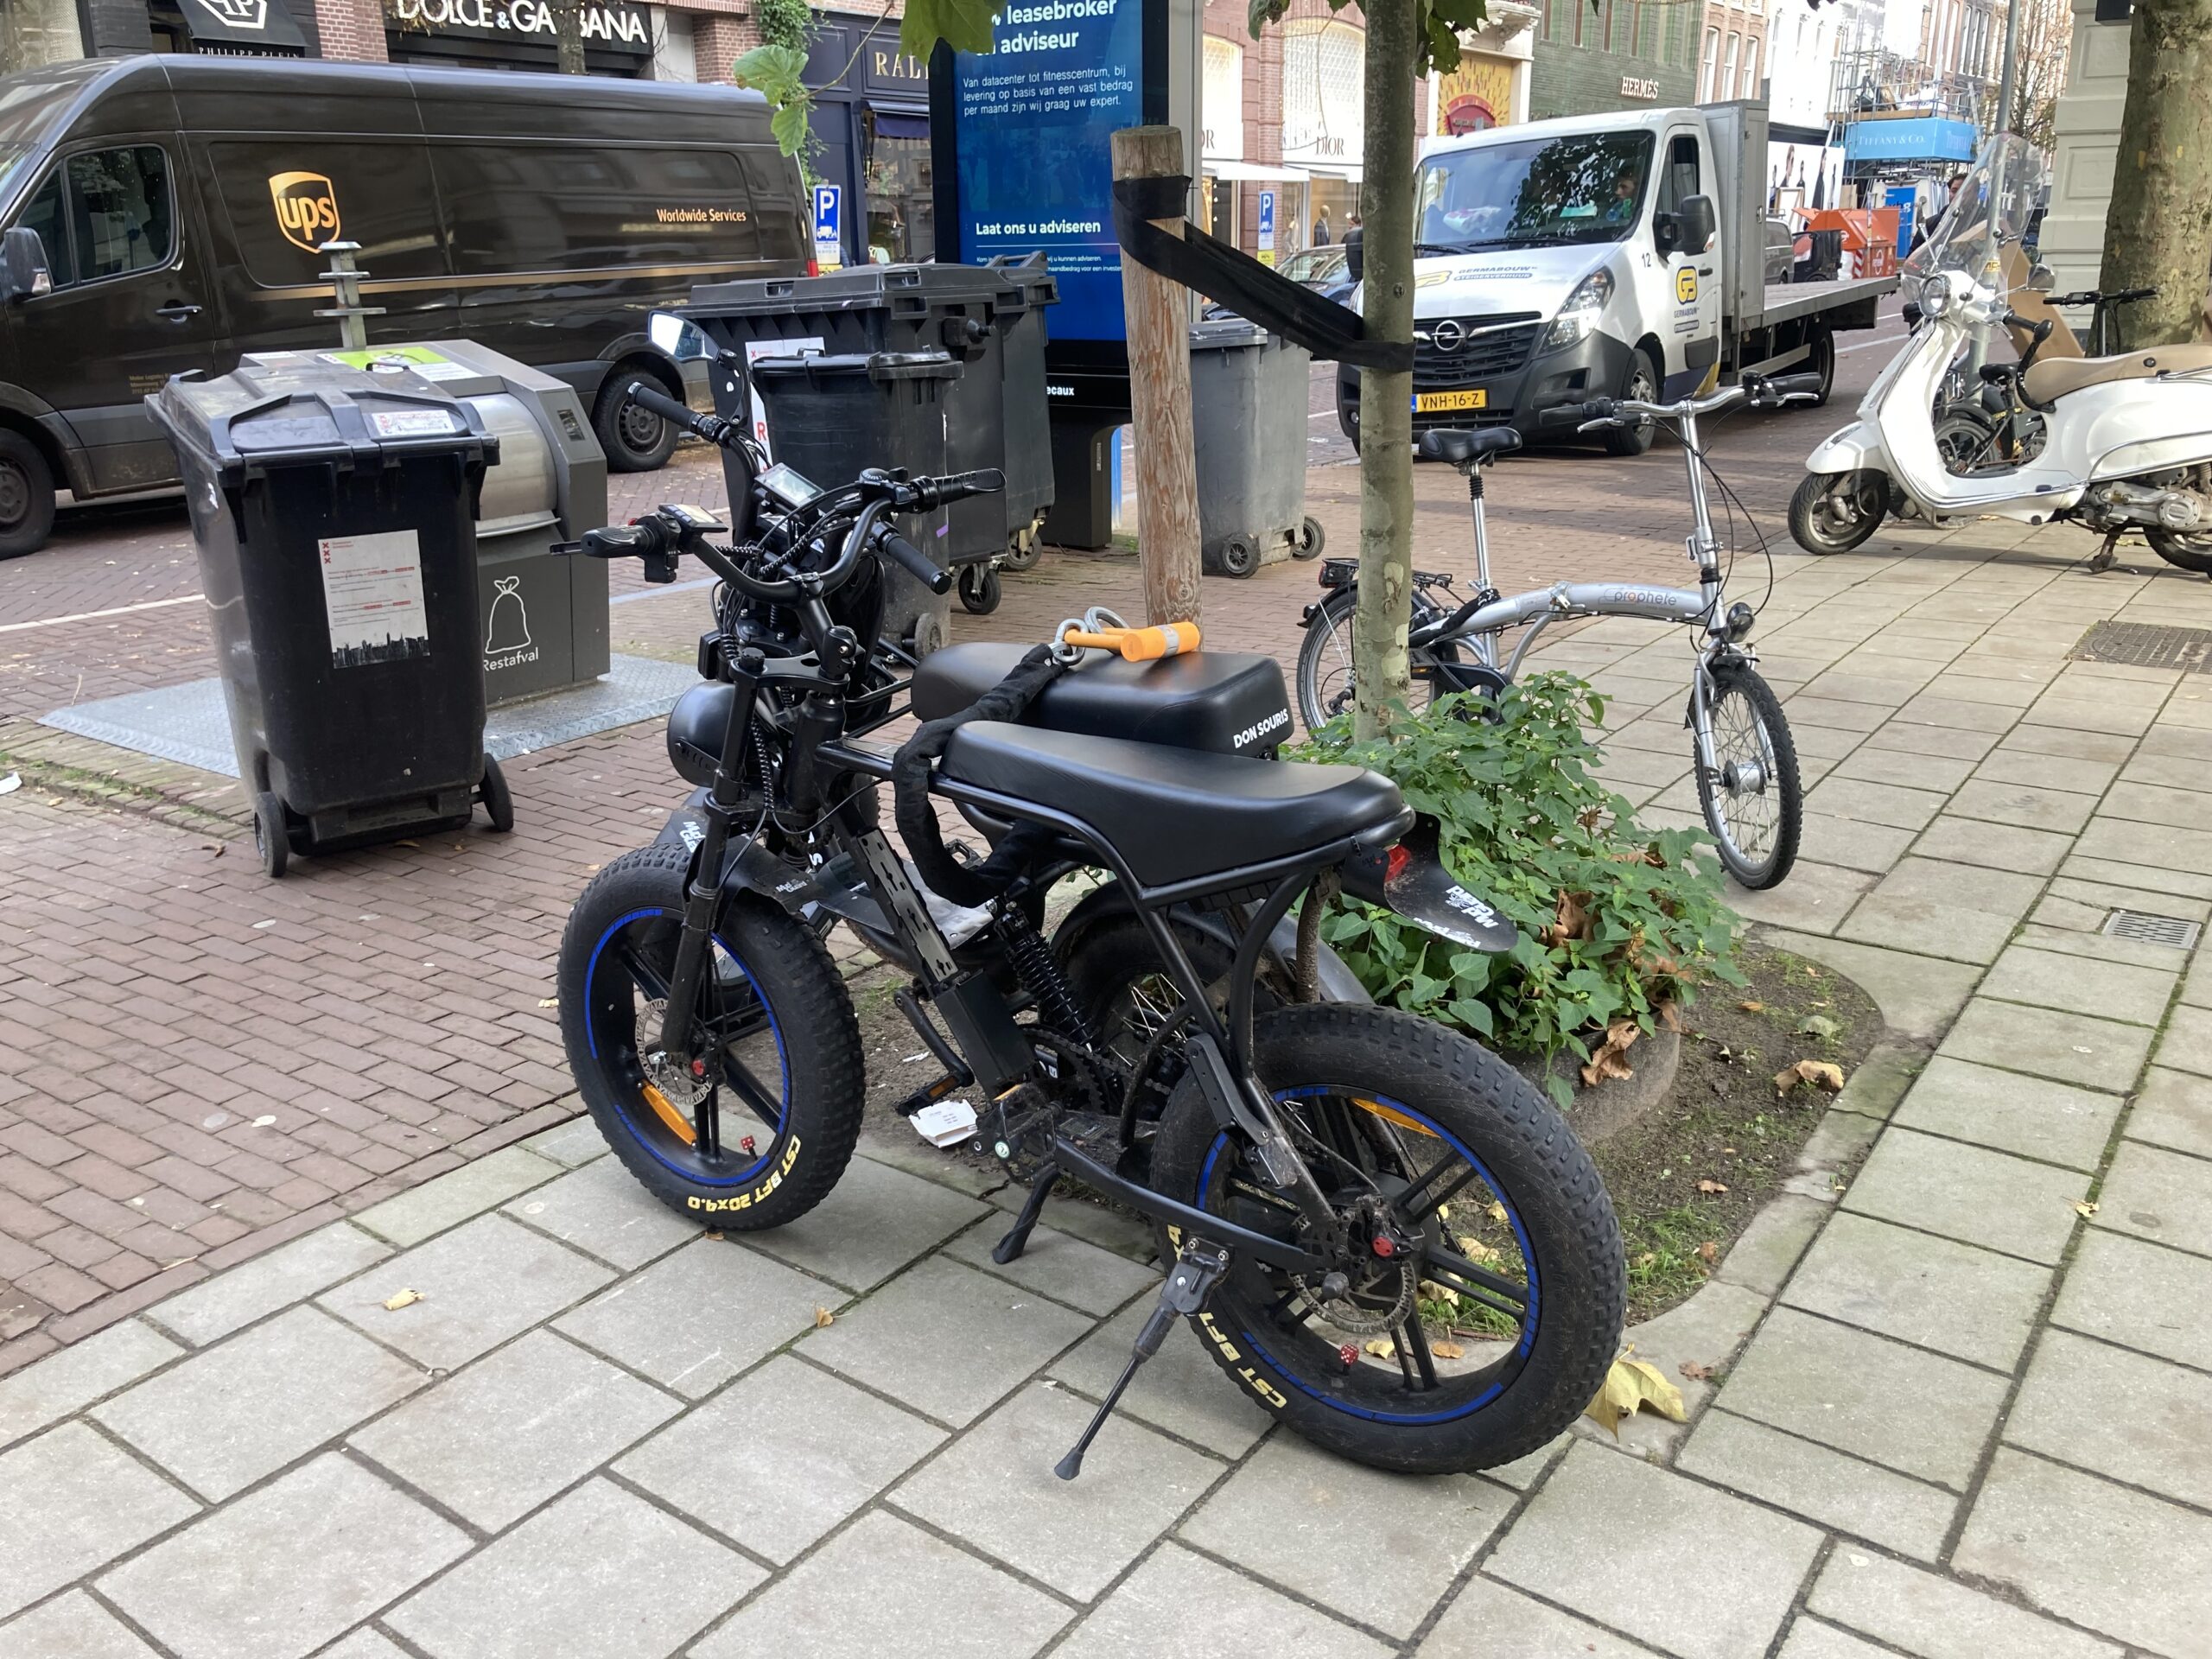 Fatbike firms call for action to stop "go faster" motor kits - DutchNews.nl